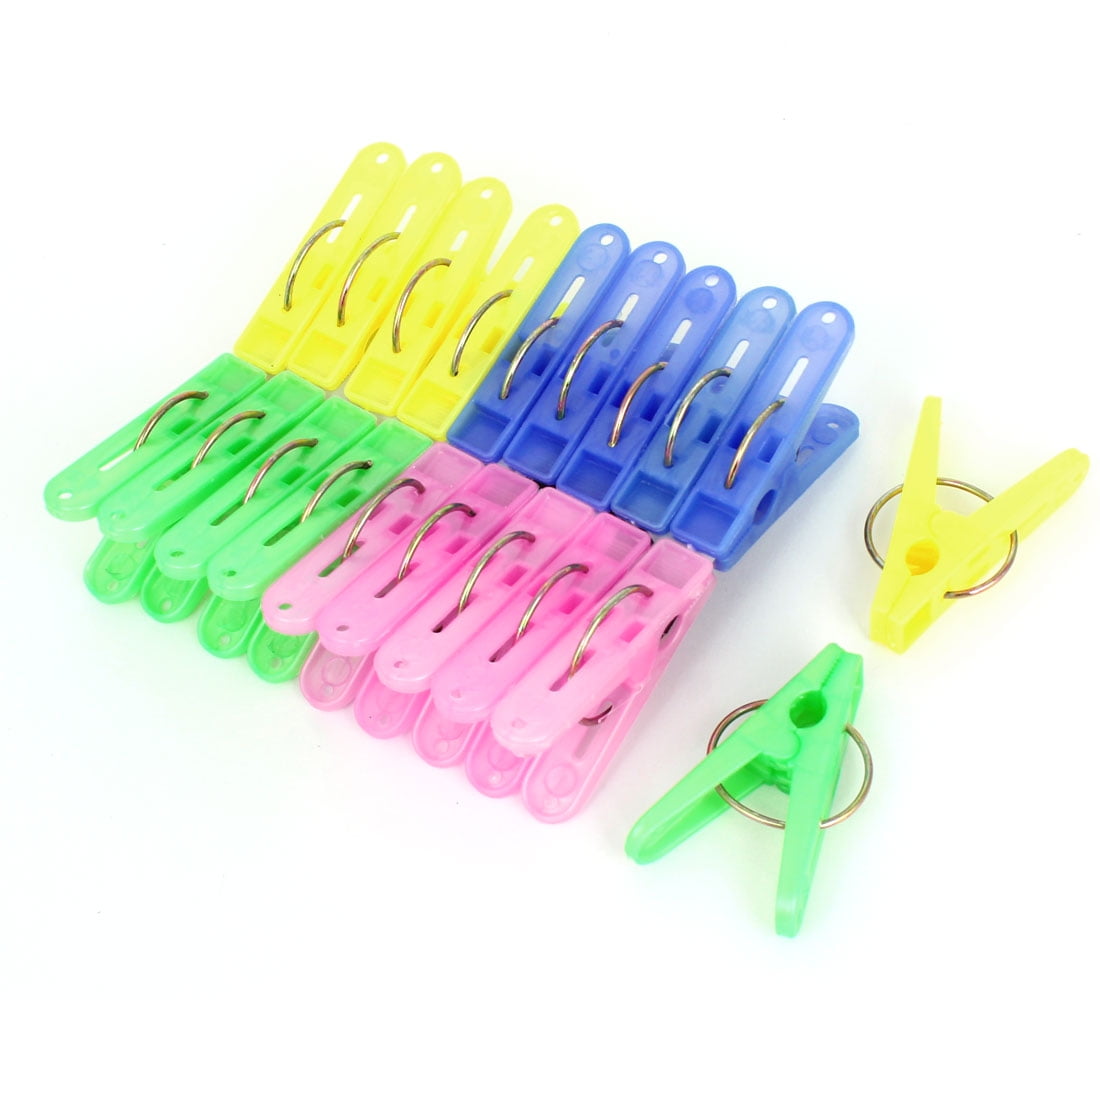 clothes pegs easy open clothes peg clothes clips washing line pegs clips plastic 